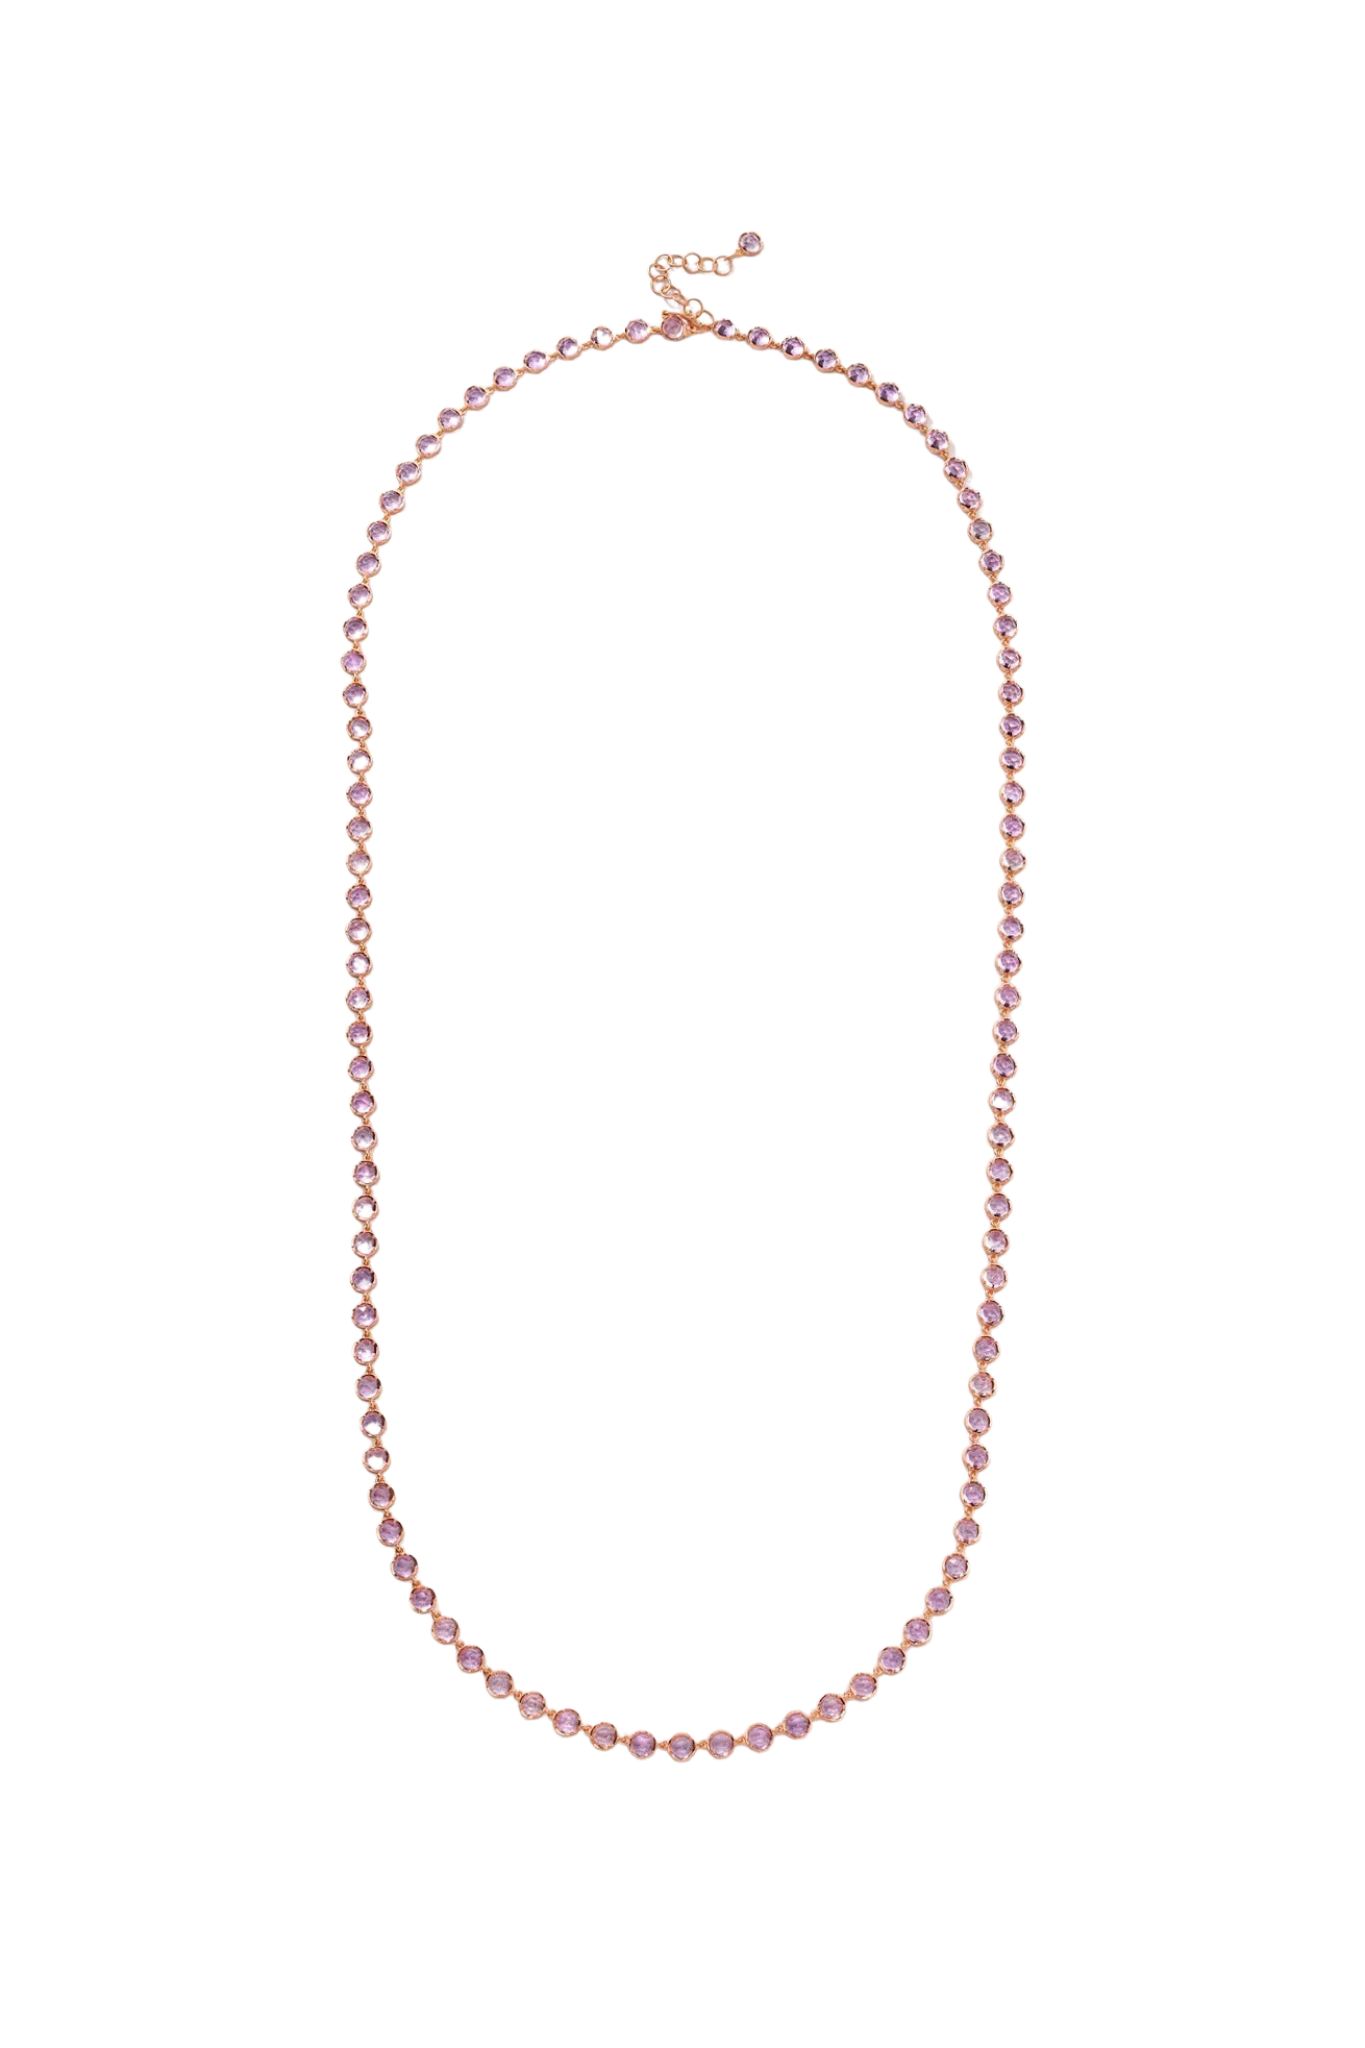 Irene Neuwirth Classic 18k Rose Gold 16" Necklace set with 5mm Rose Cut Rose of France